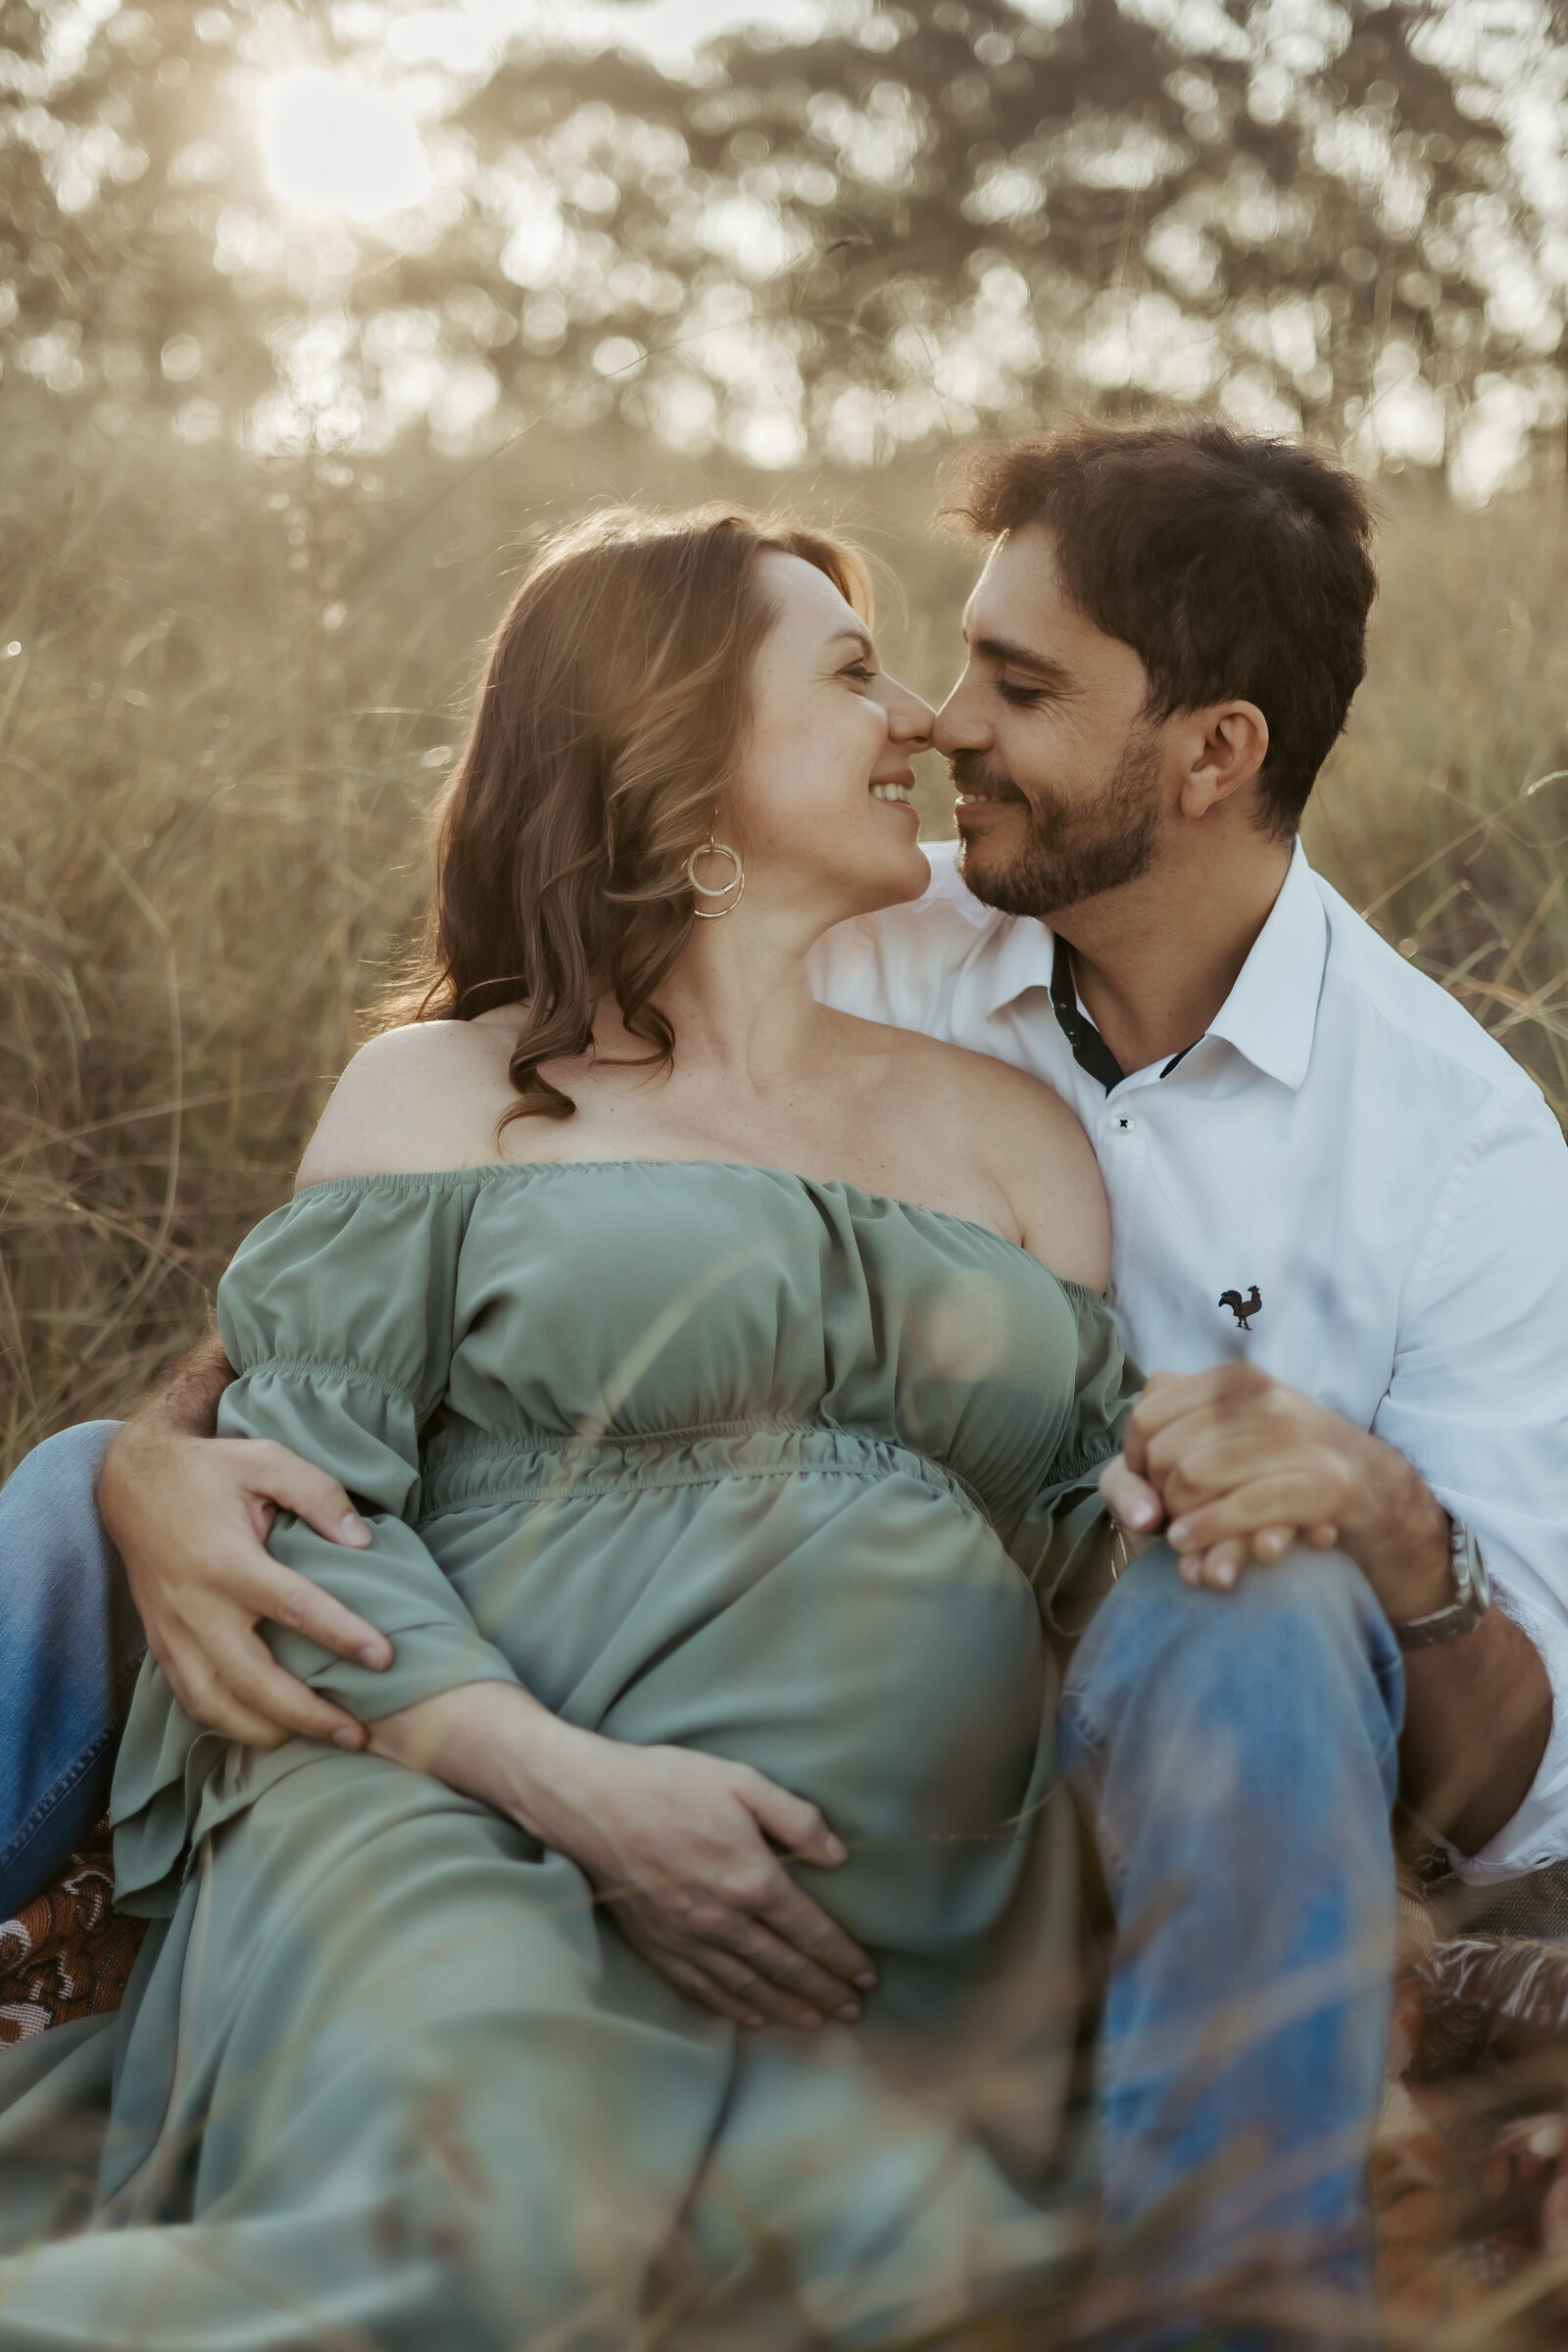 Pregnant mum-to-be with husband lying together in a peaceful field smiling while their noses touch